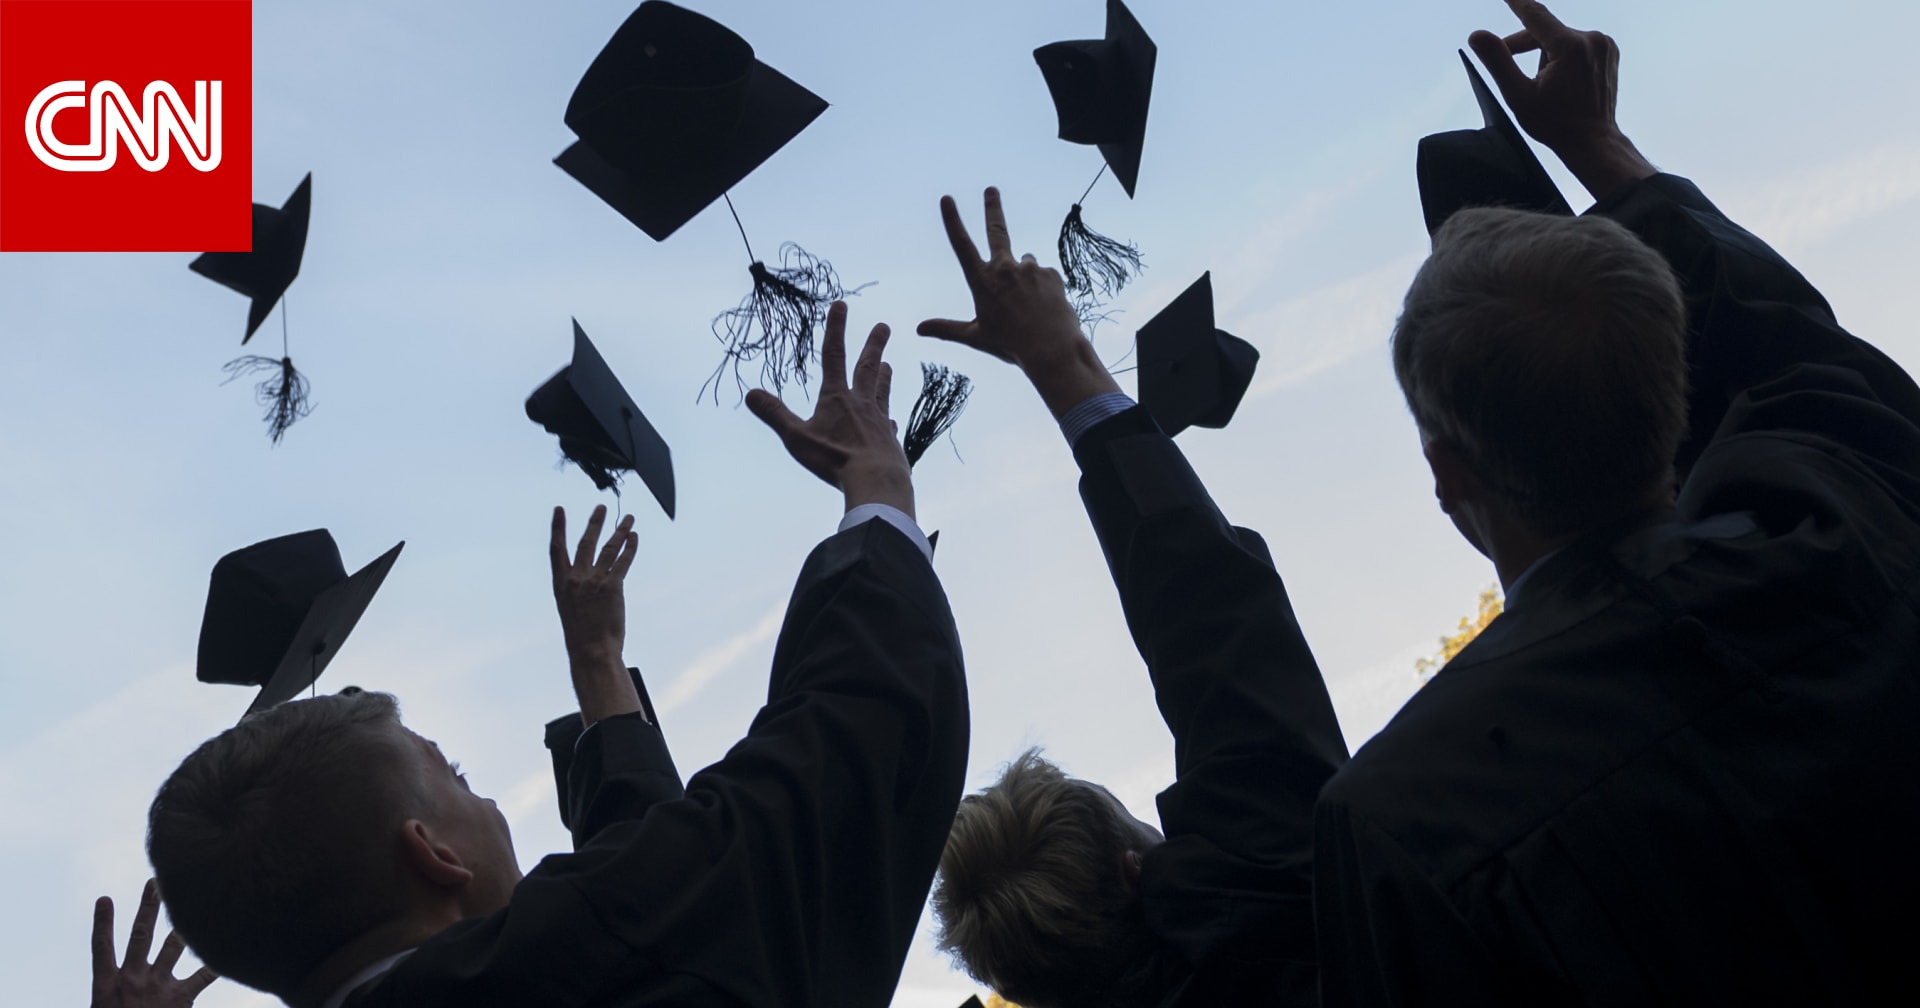 Are there enough training opportunities for the latest graduates in 2021?